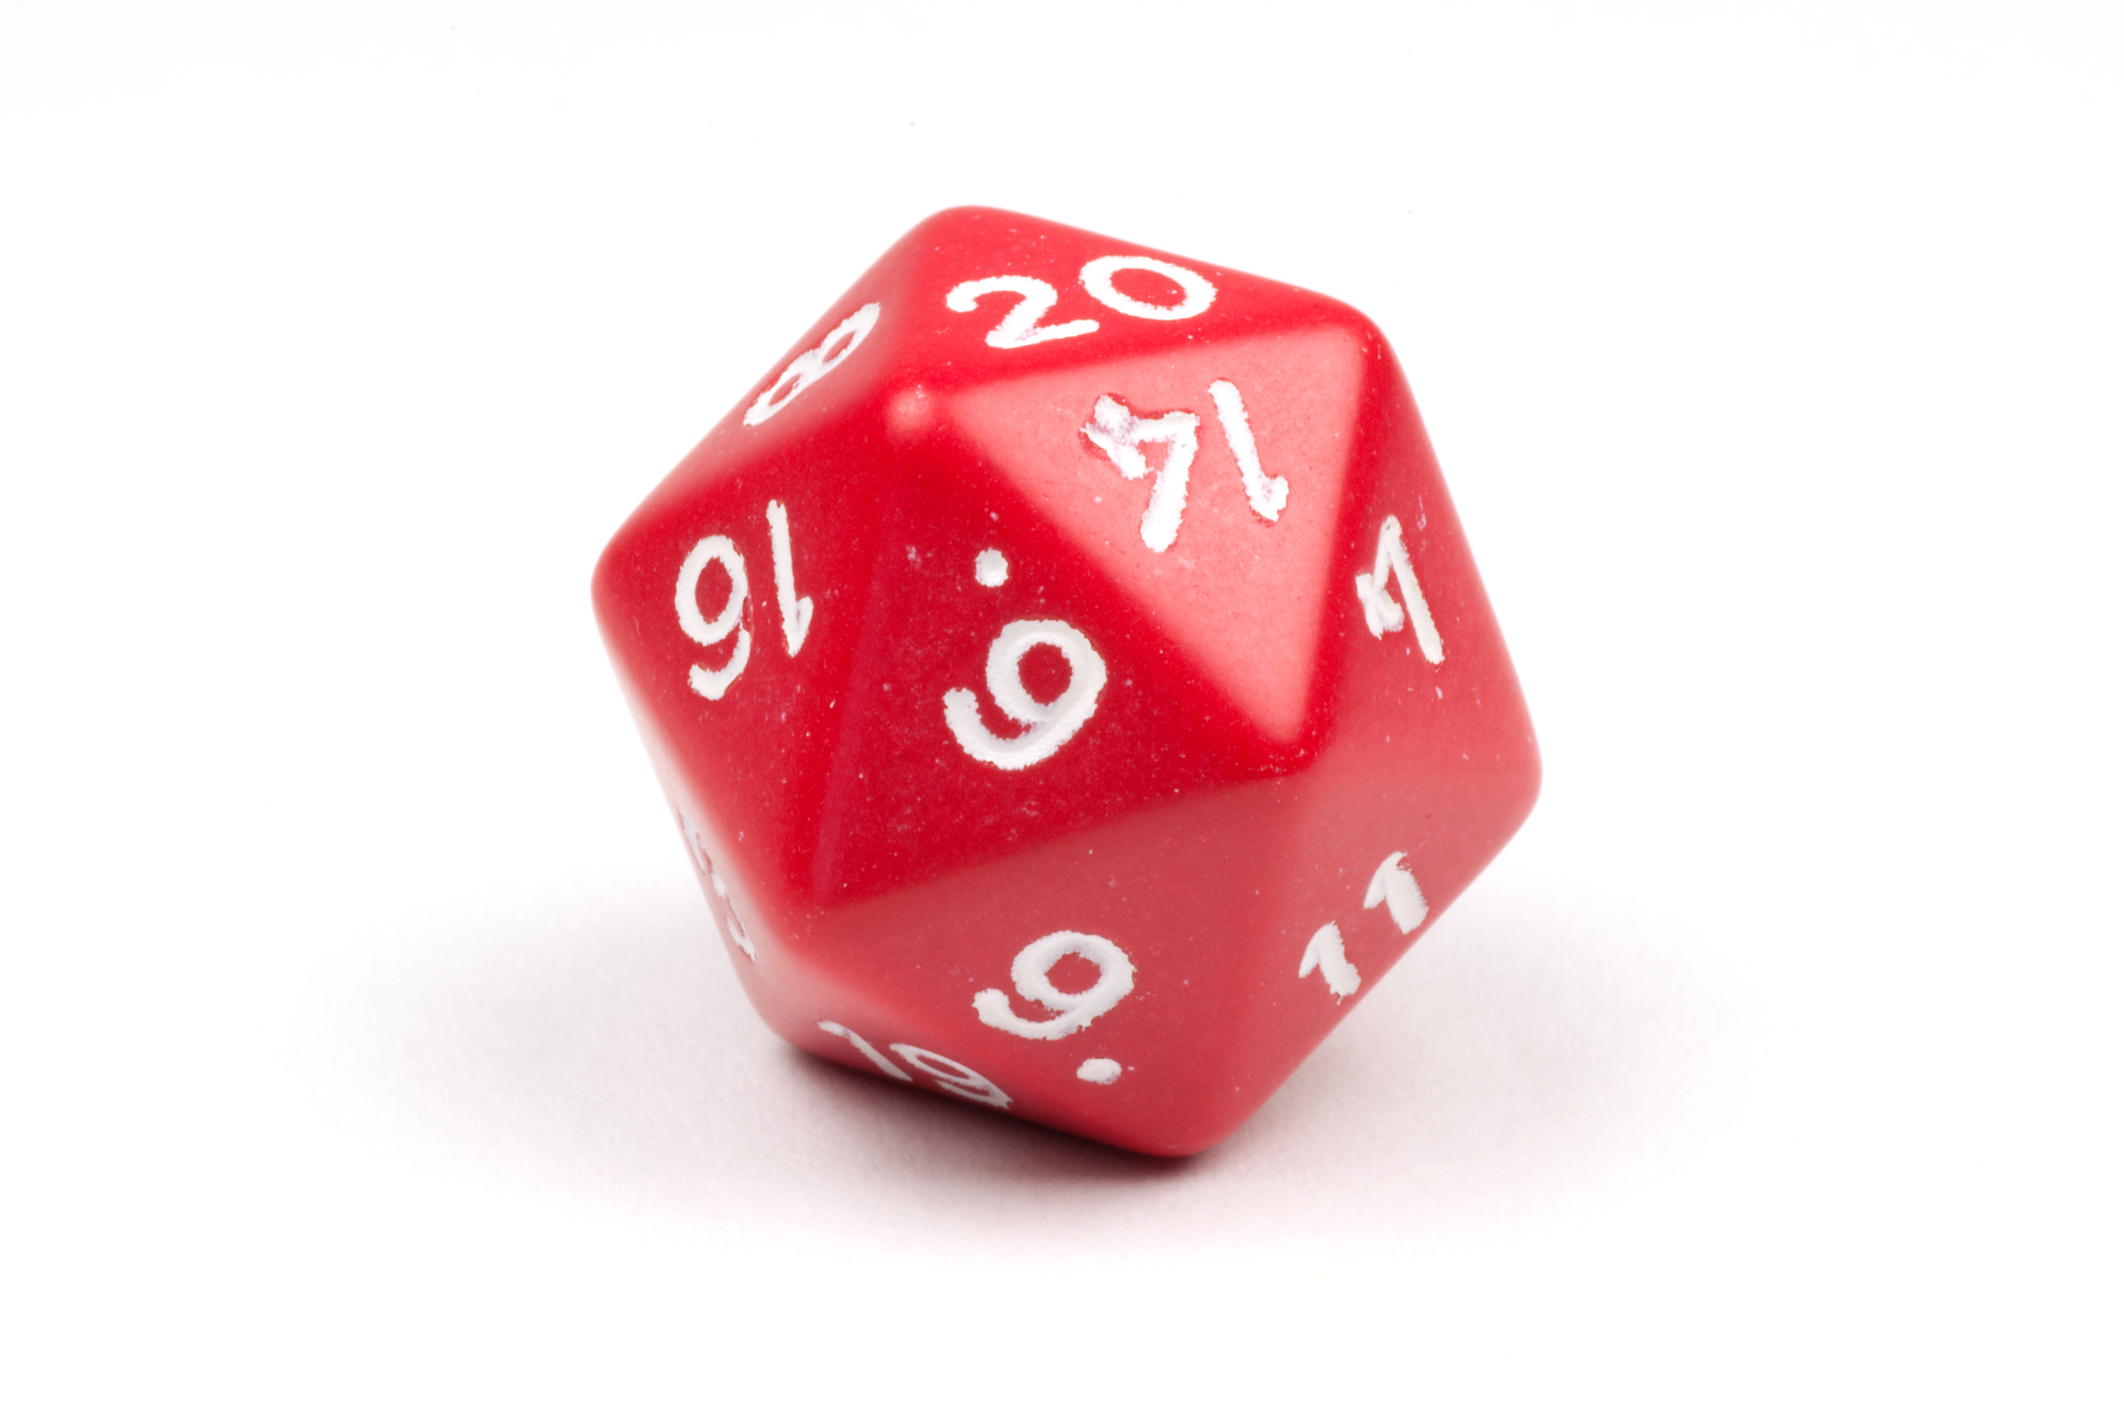 A single red 20-sided die on white | © Michaeleisenhut | Dreamstime Stock Photos | © Michaeleisenhut | Dreamstime Stock Photos